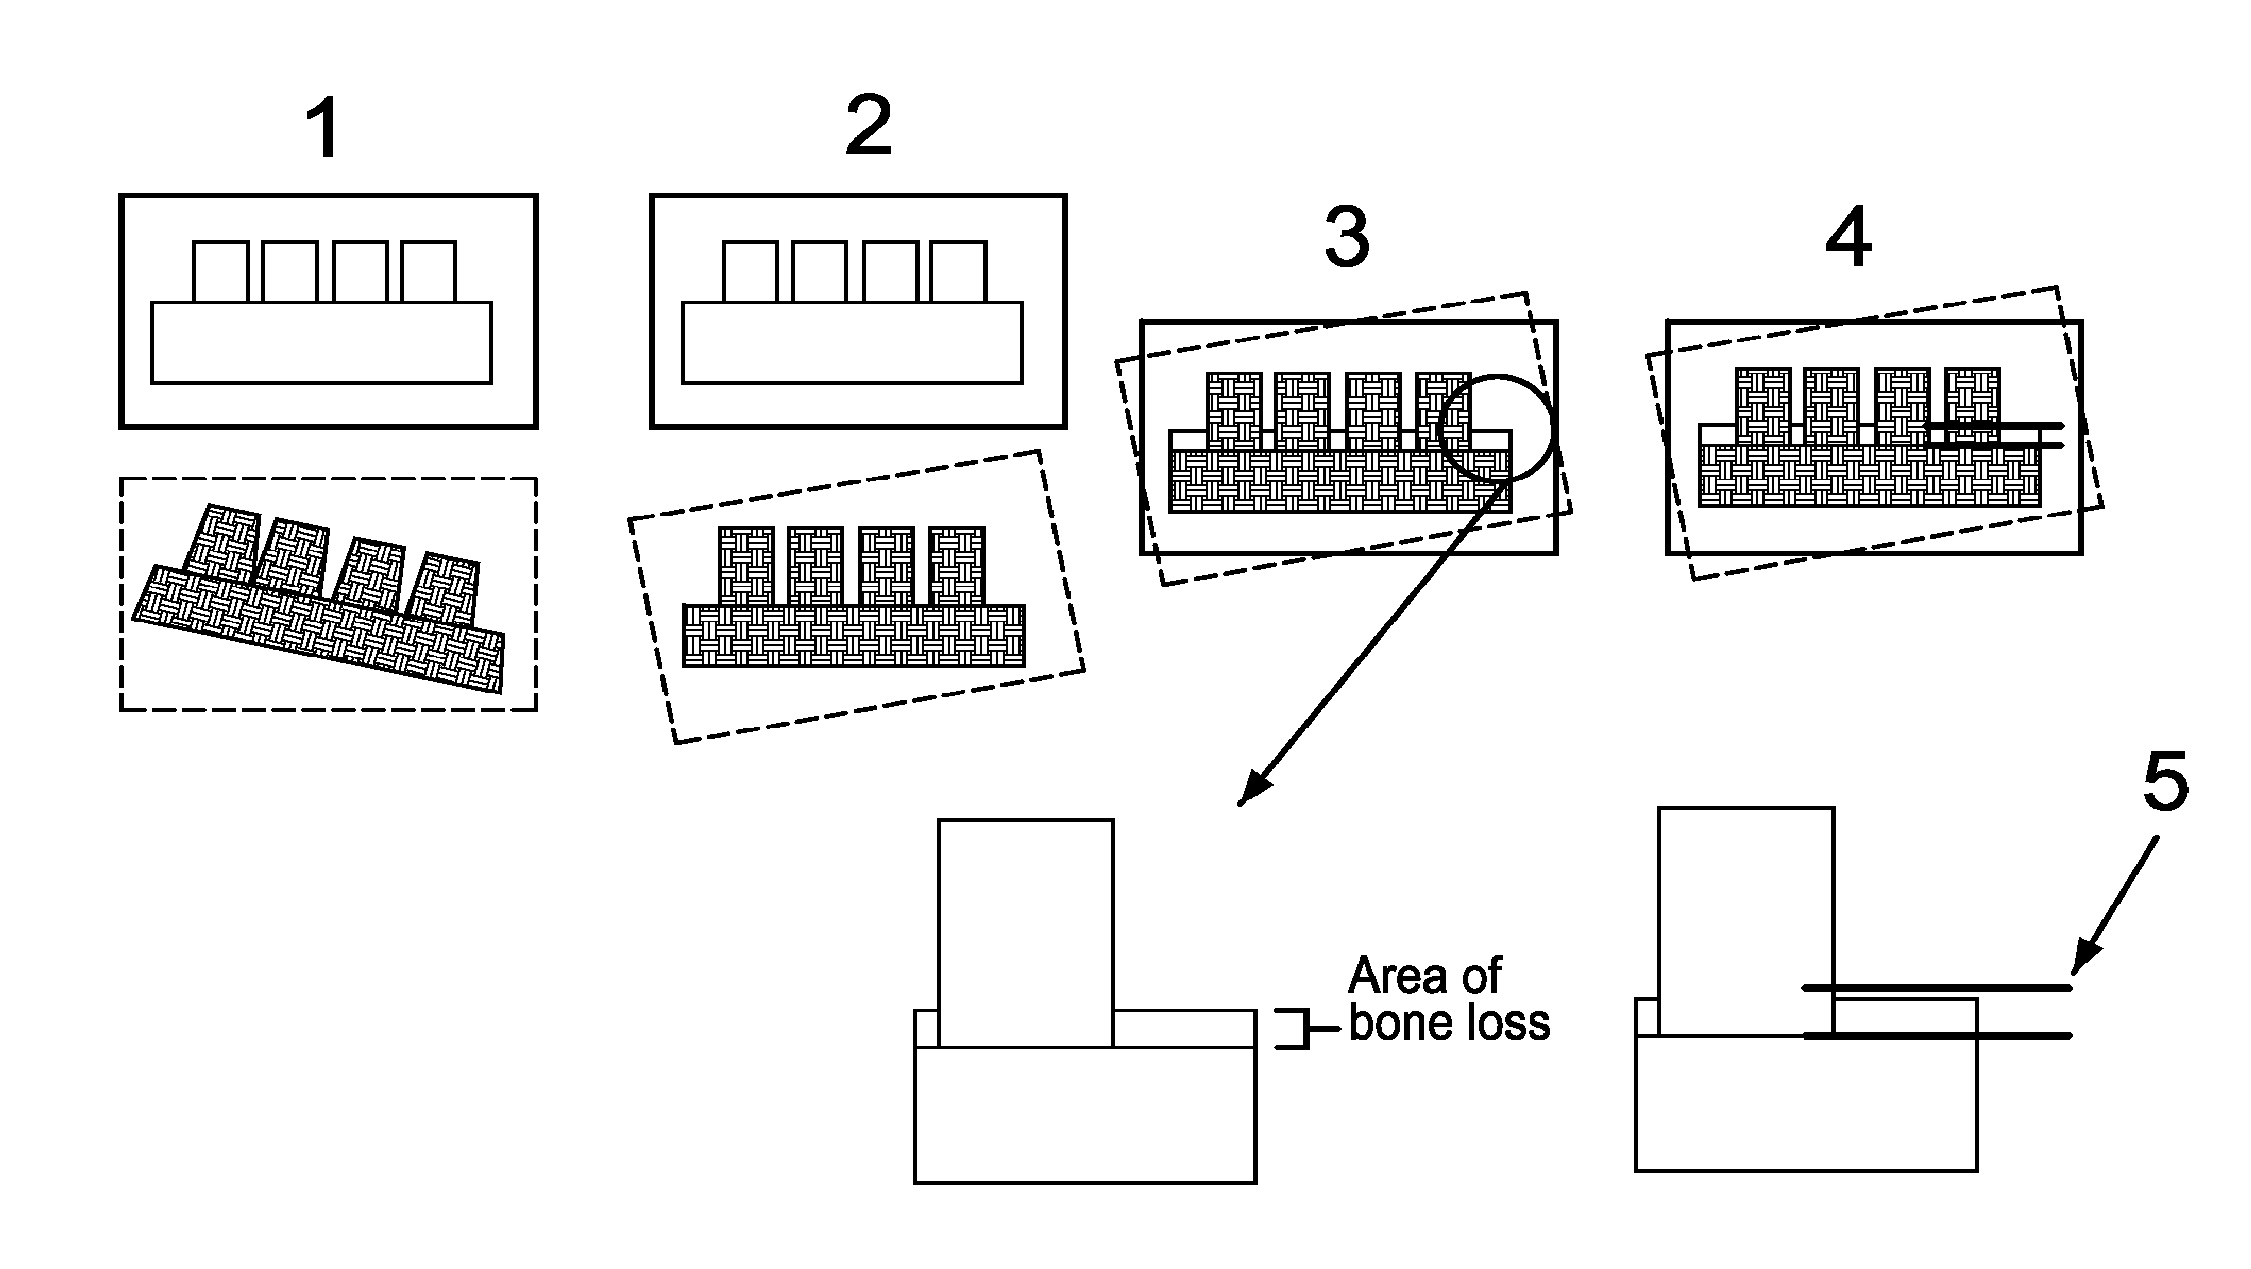 System and method for detecting and tracking change in dental x-rays and dental images